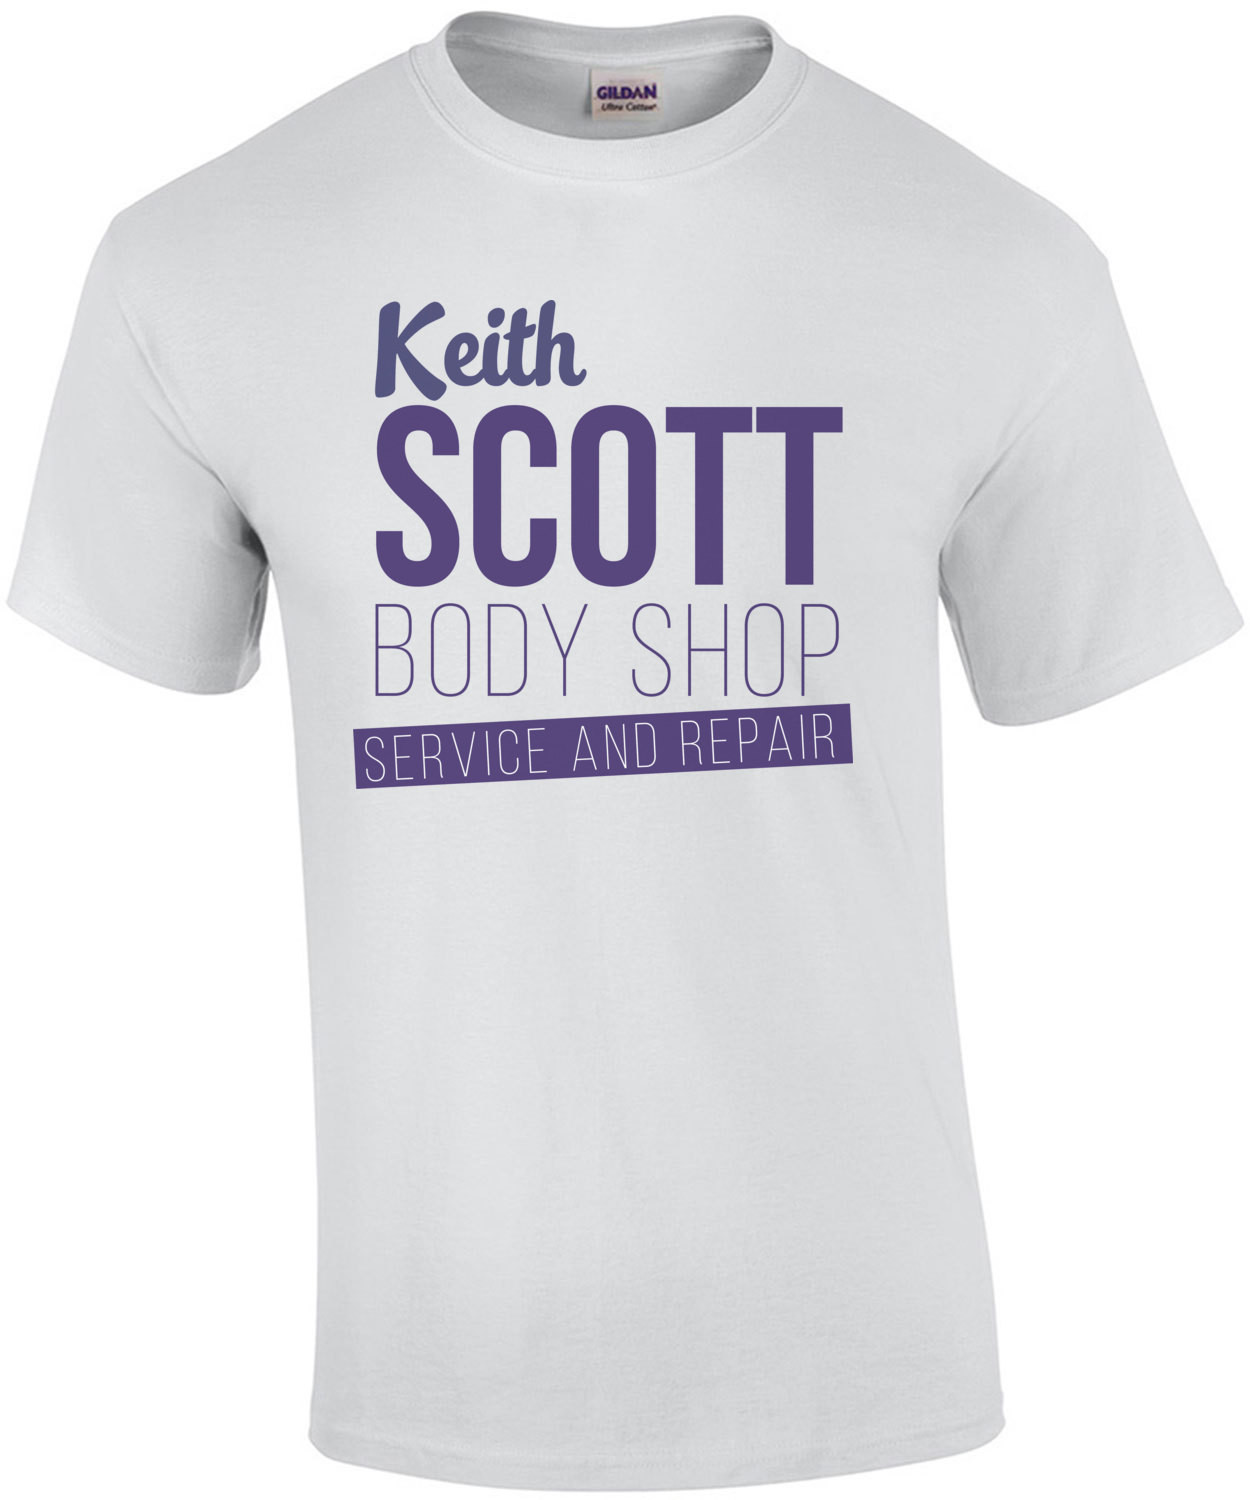 Keith Scott Body Shop Serivce and Repair - one tree hill